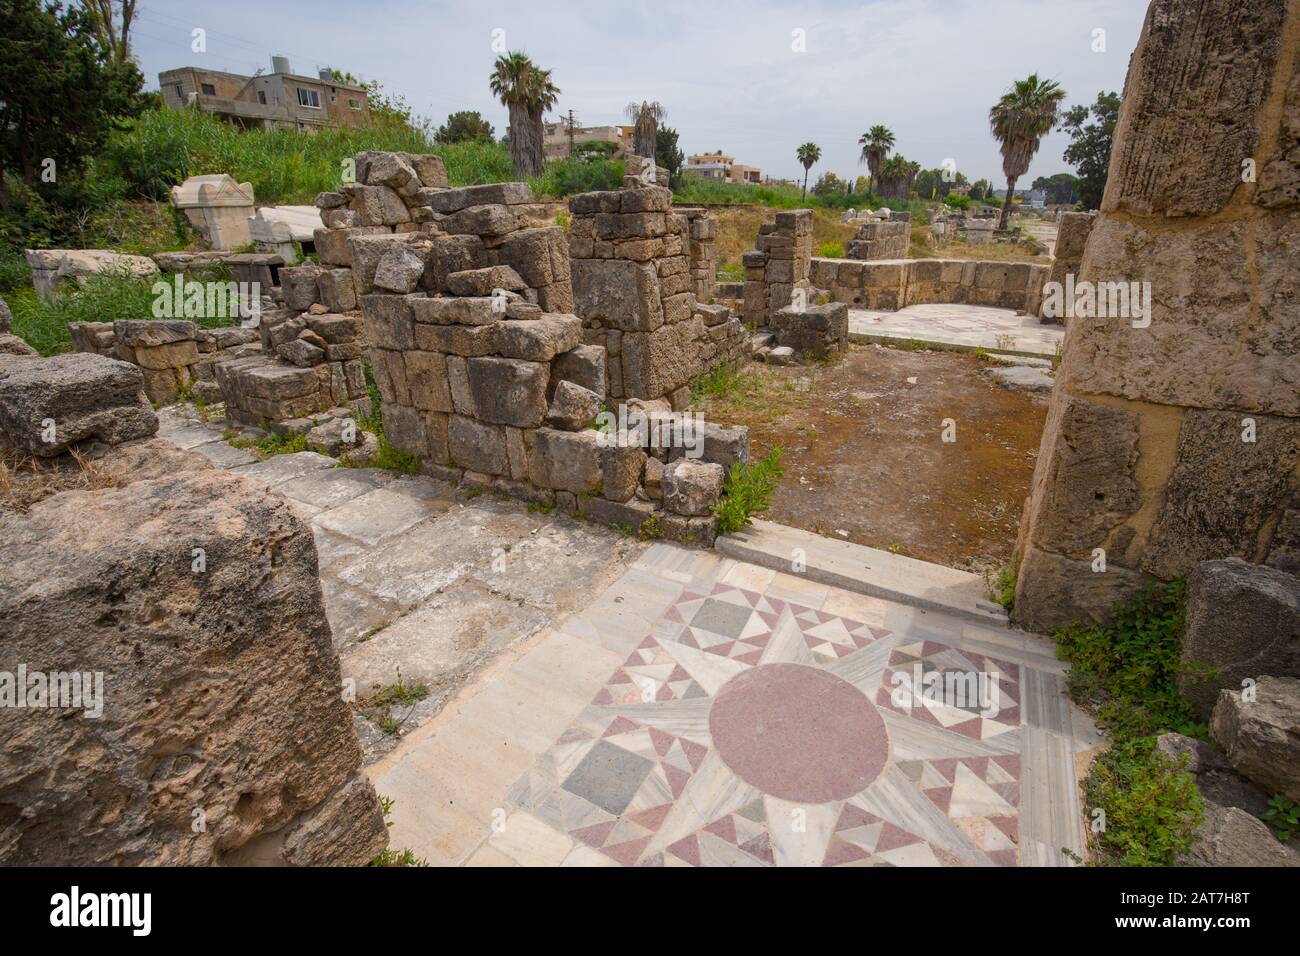 Roman paving. Roman remains in Tyre. Tyre is an ancient Phoenician city. Tyre, Lebanon - June, 2019 Stock Photo